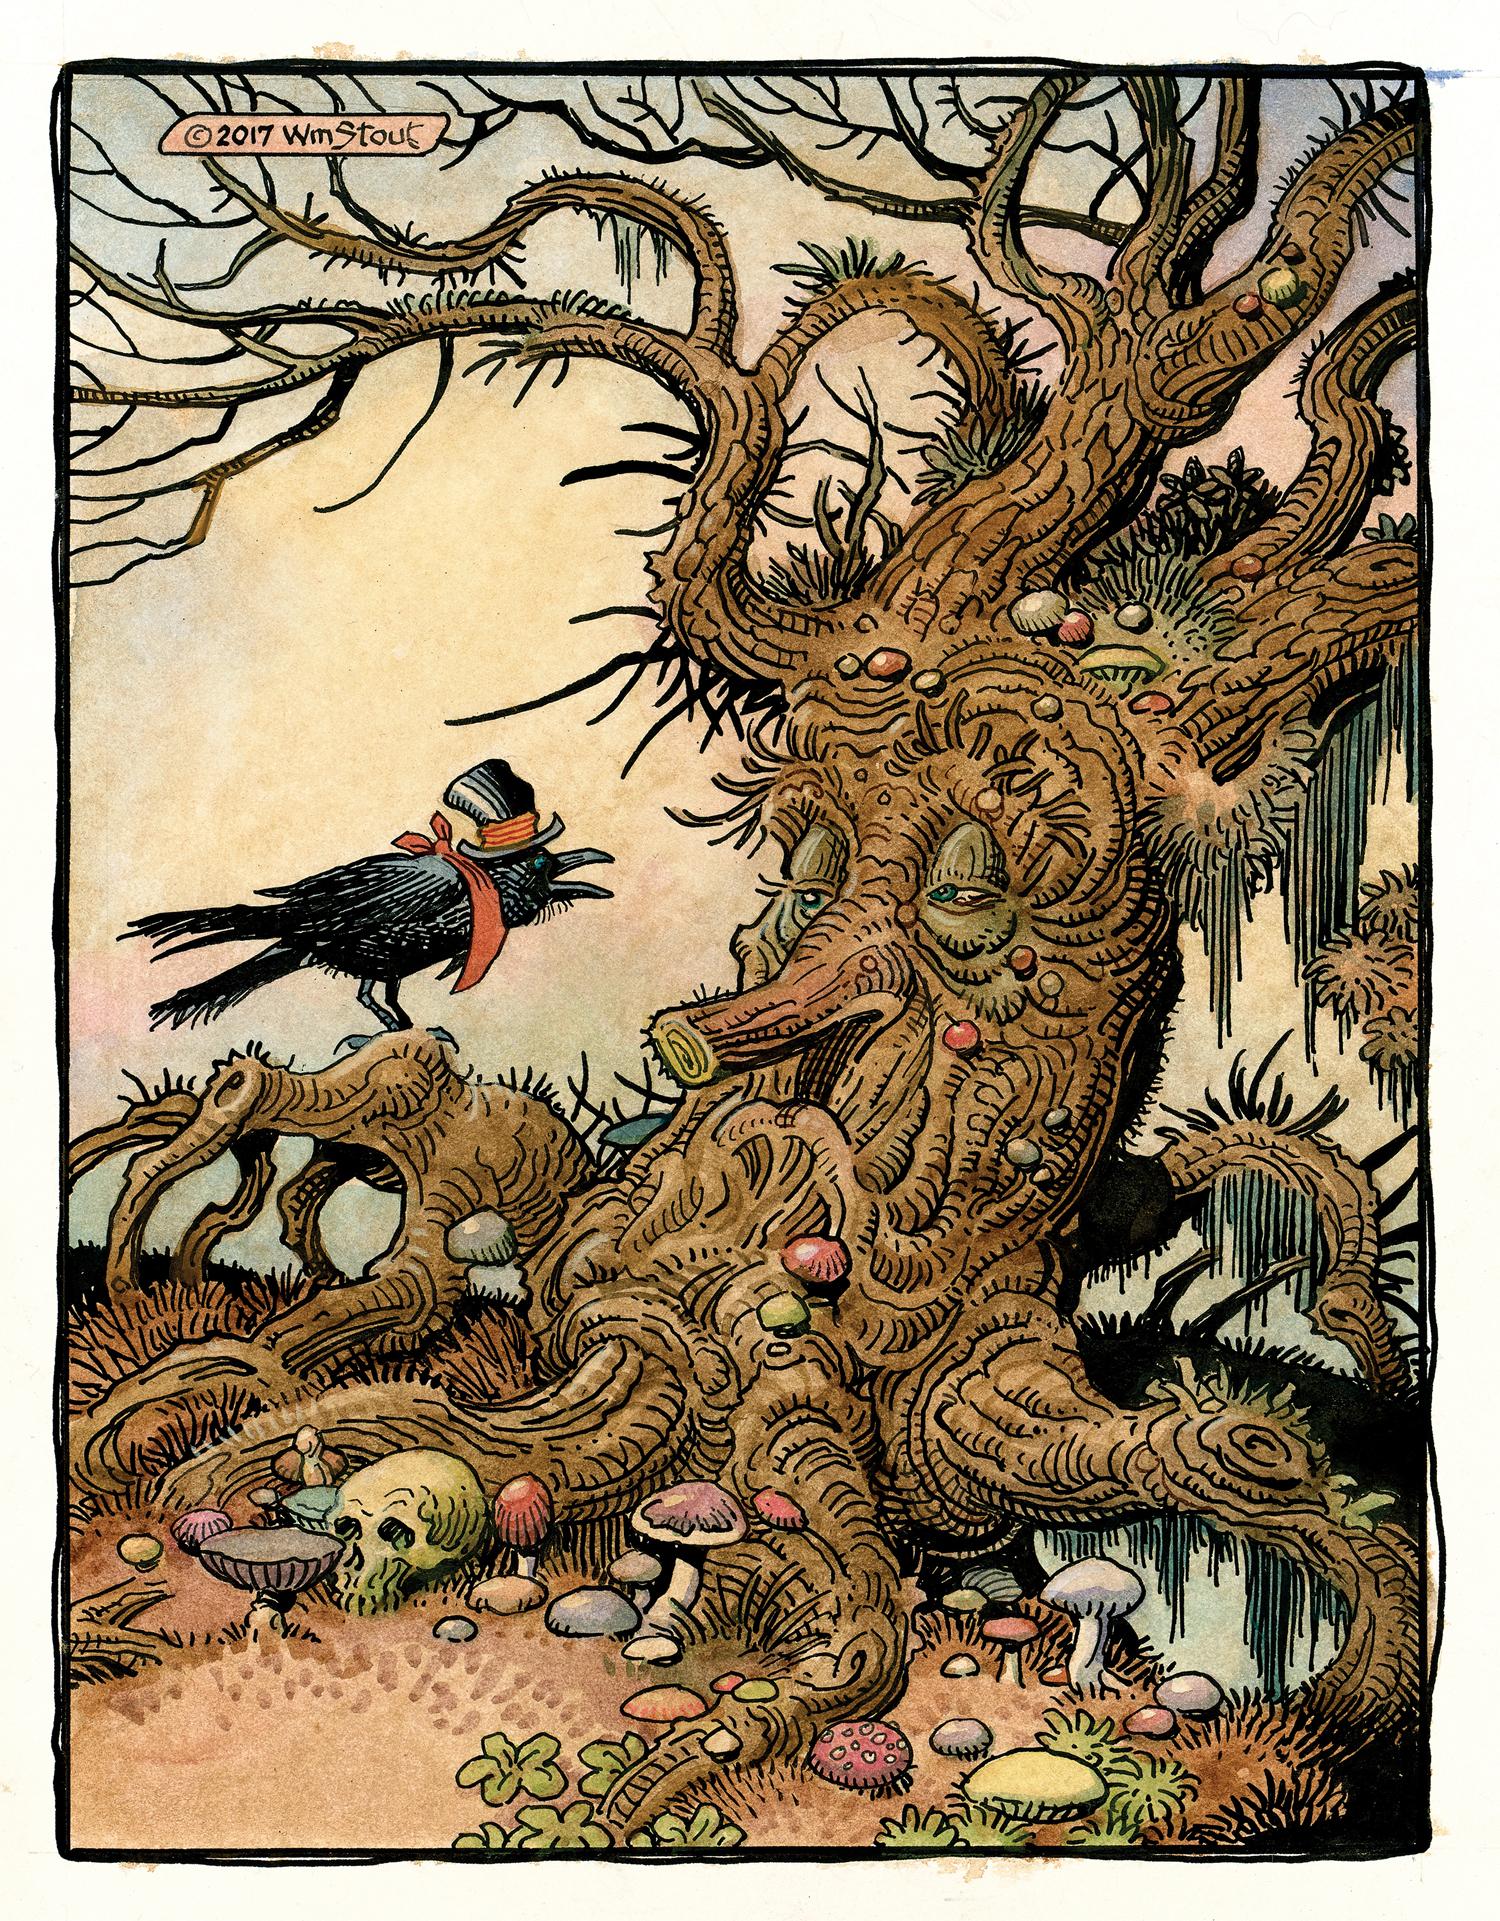 The Tree and the Crow - Painting by William Stout